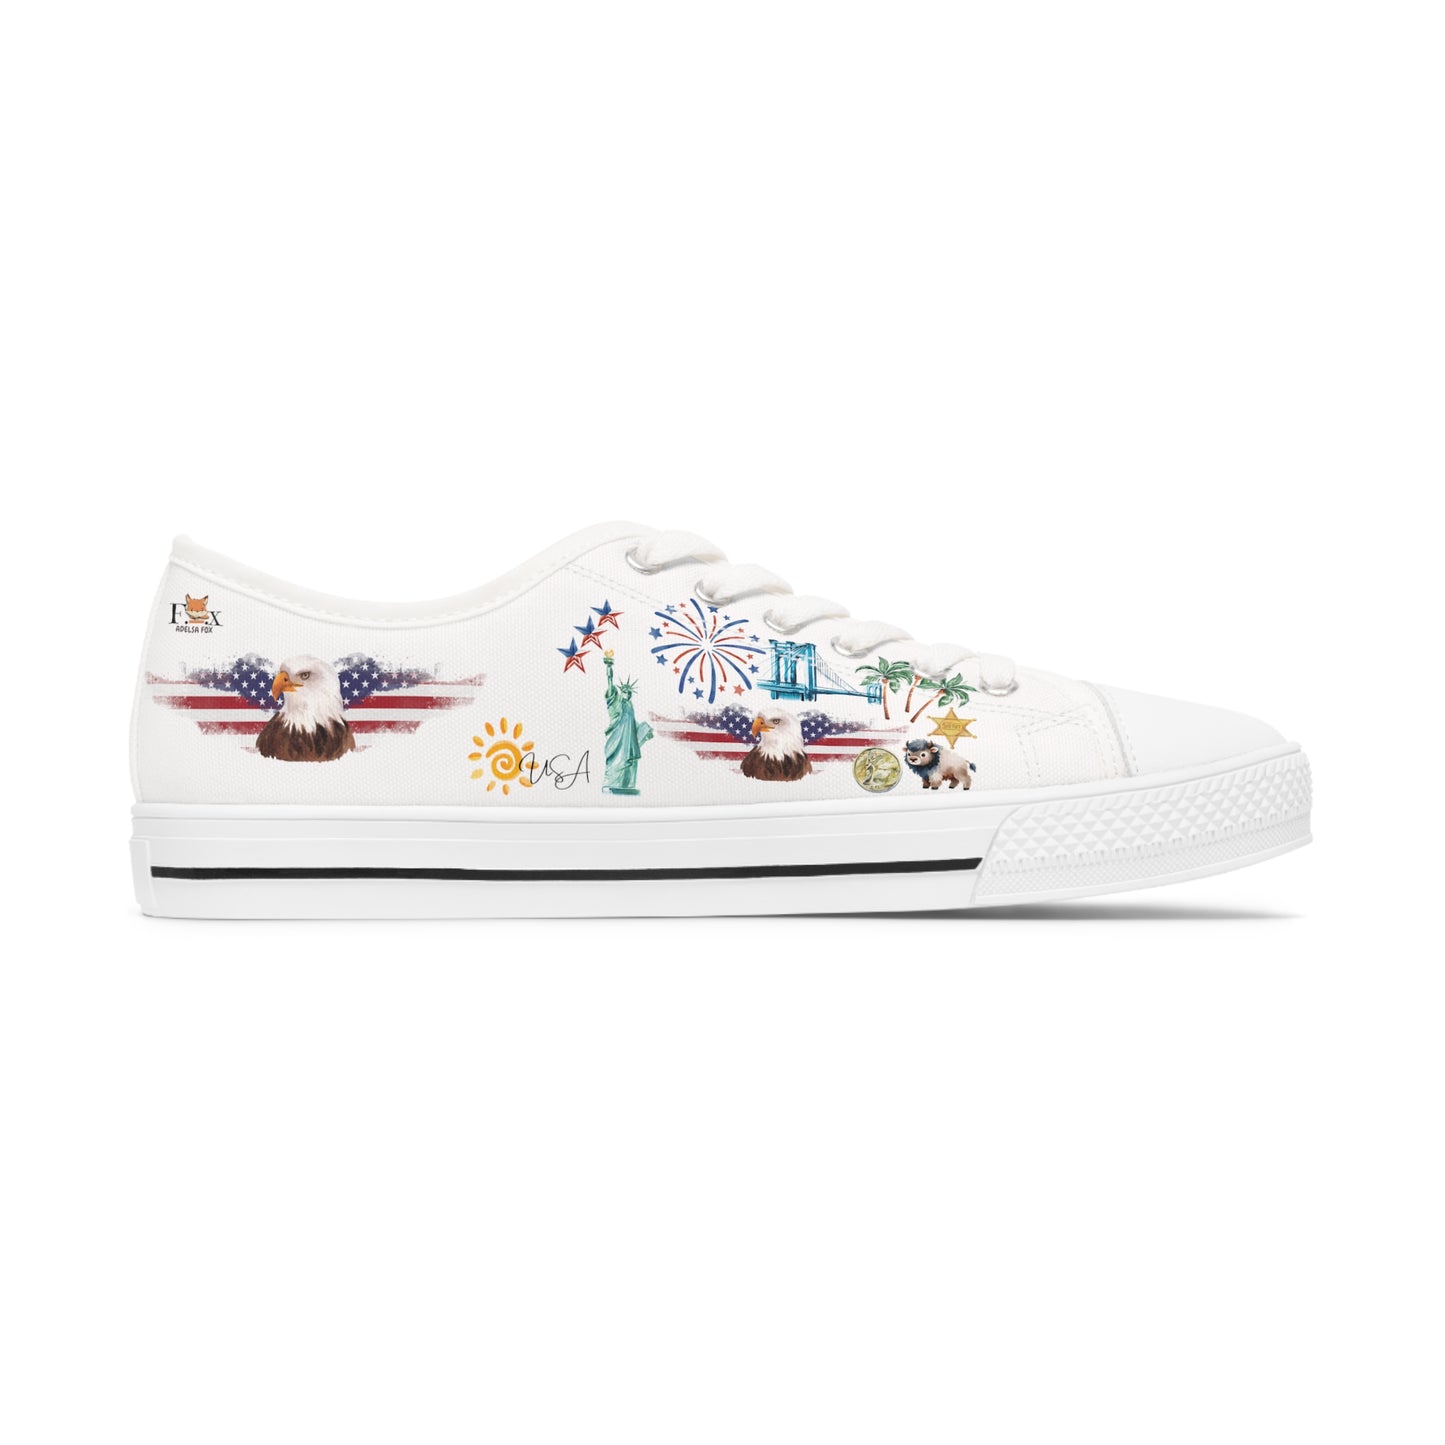 USA is calling & i must Go - First Travel Edition - White Background Sneakers